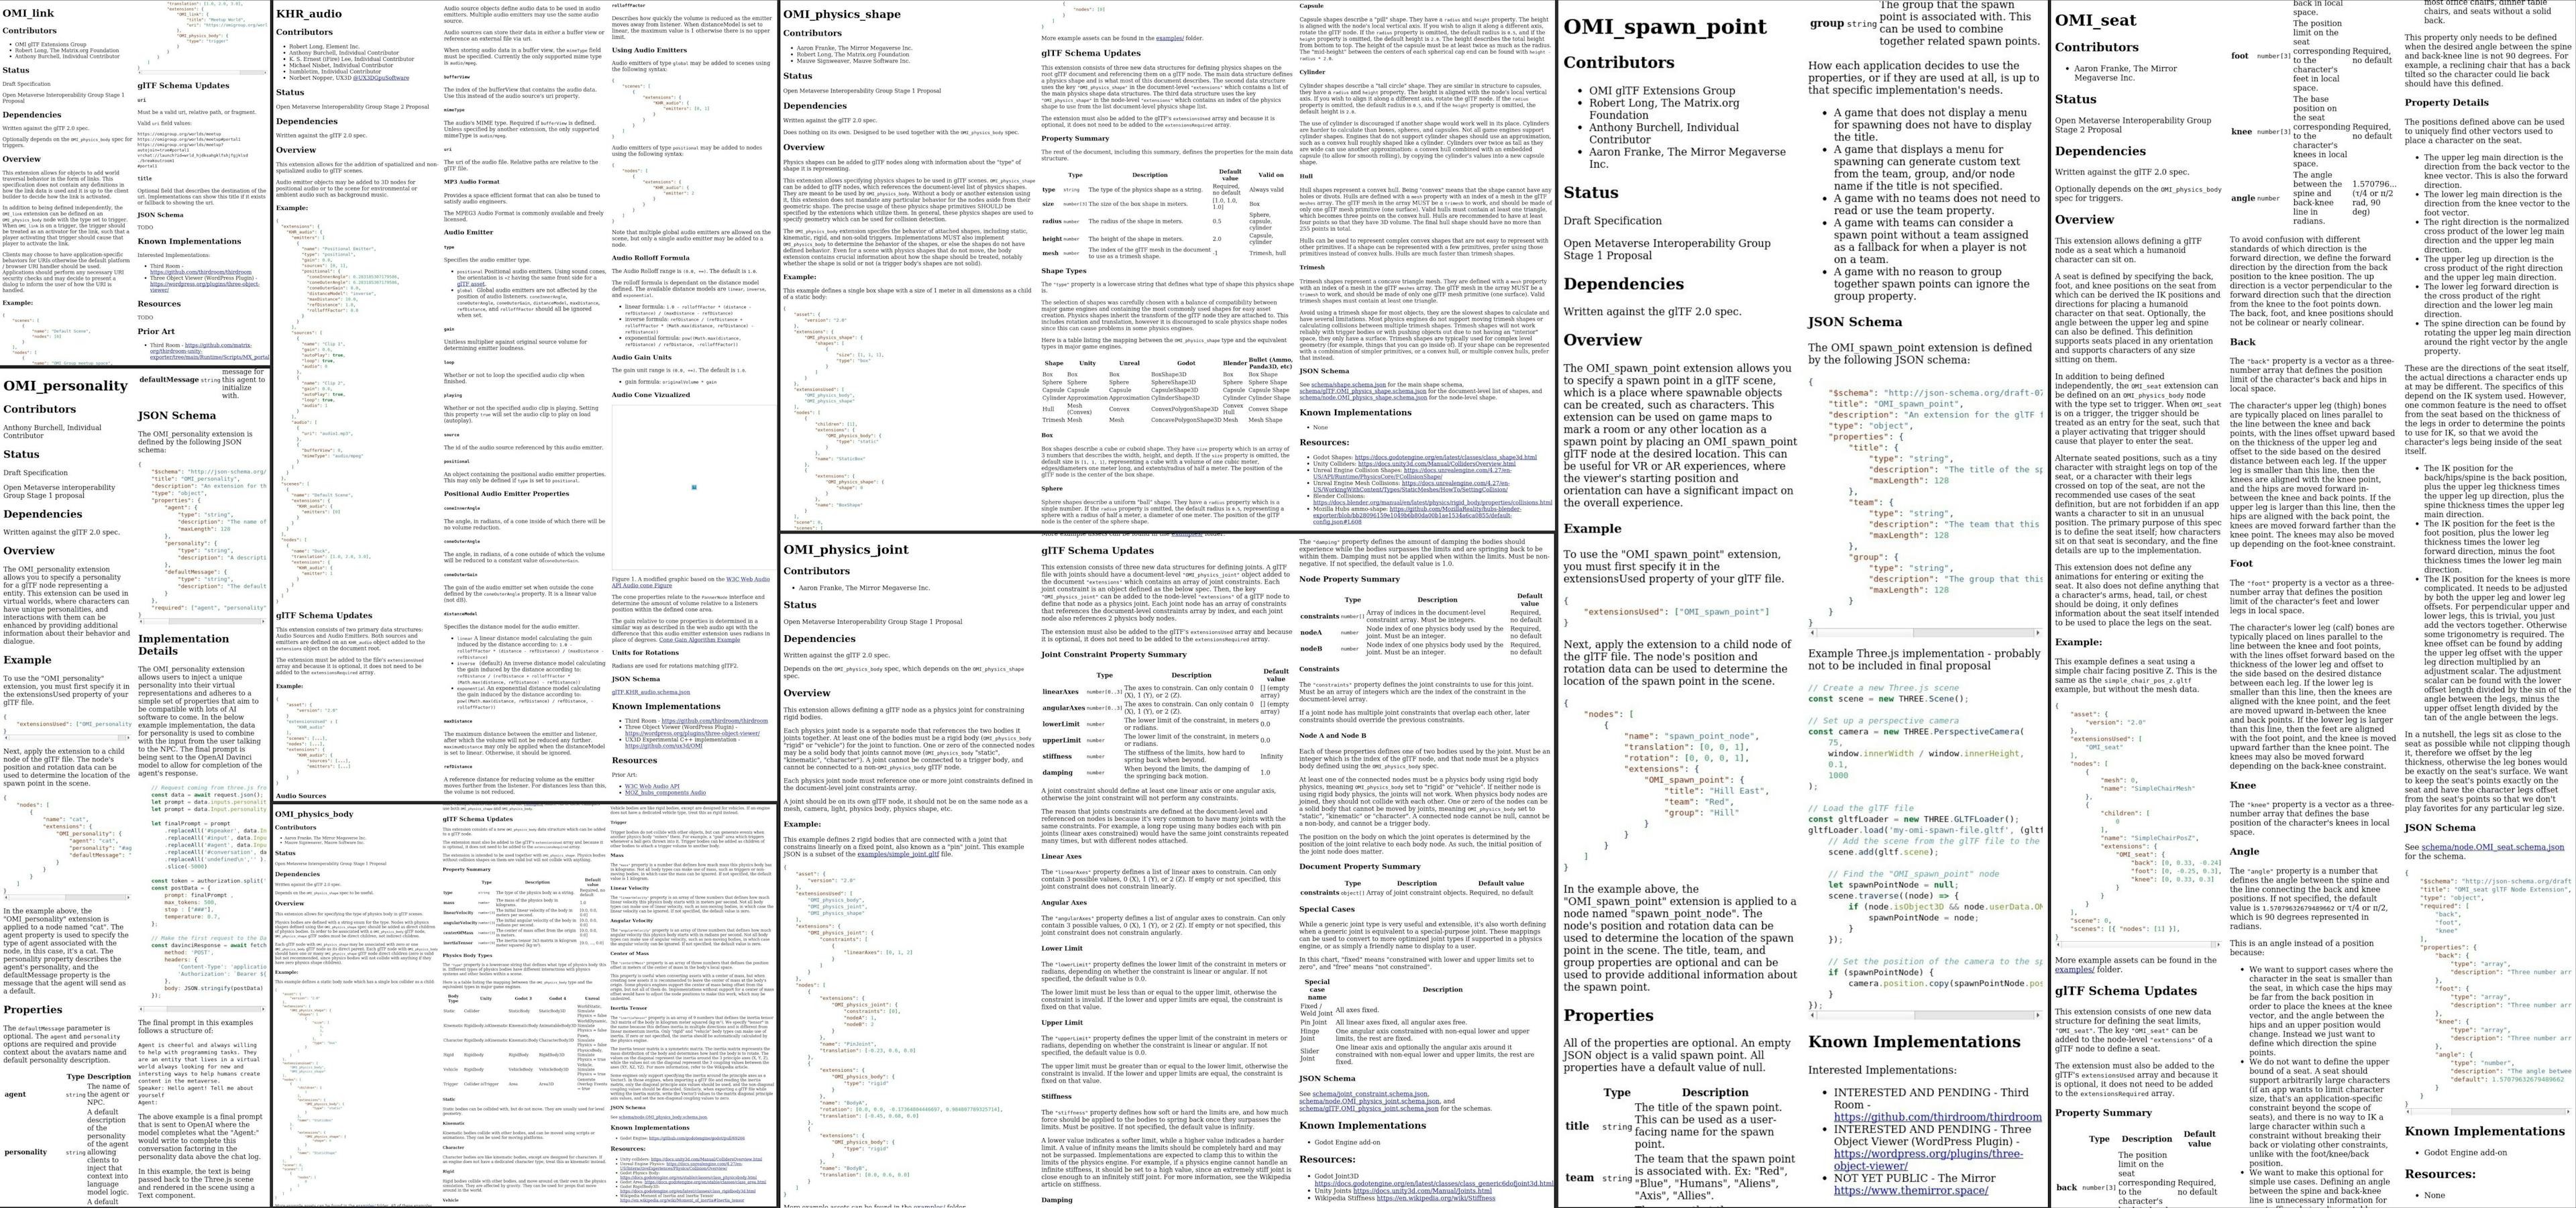 These posters are auto-generated from markdown docs, see https://github.com/omigroup/omi-archive / https://i.imgur.com/qESScfH.jpg